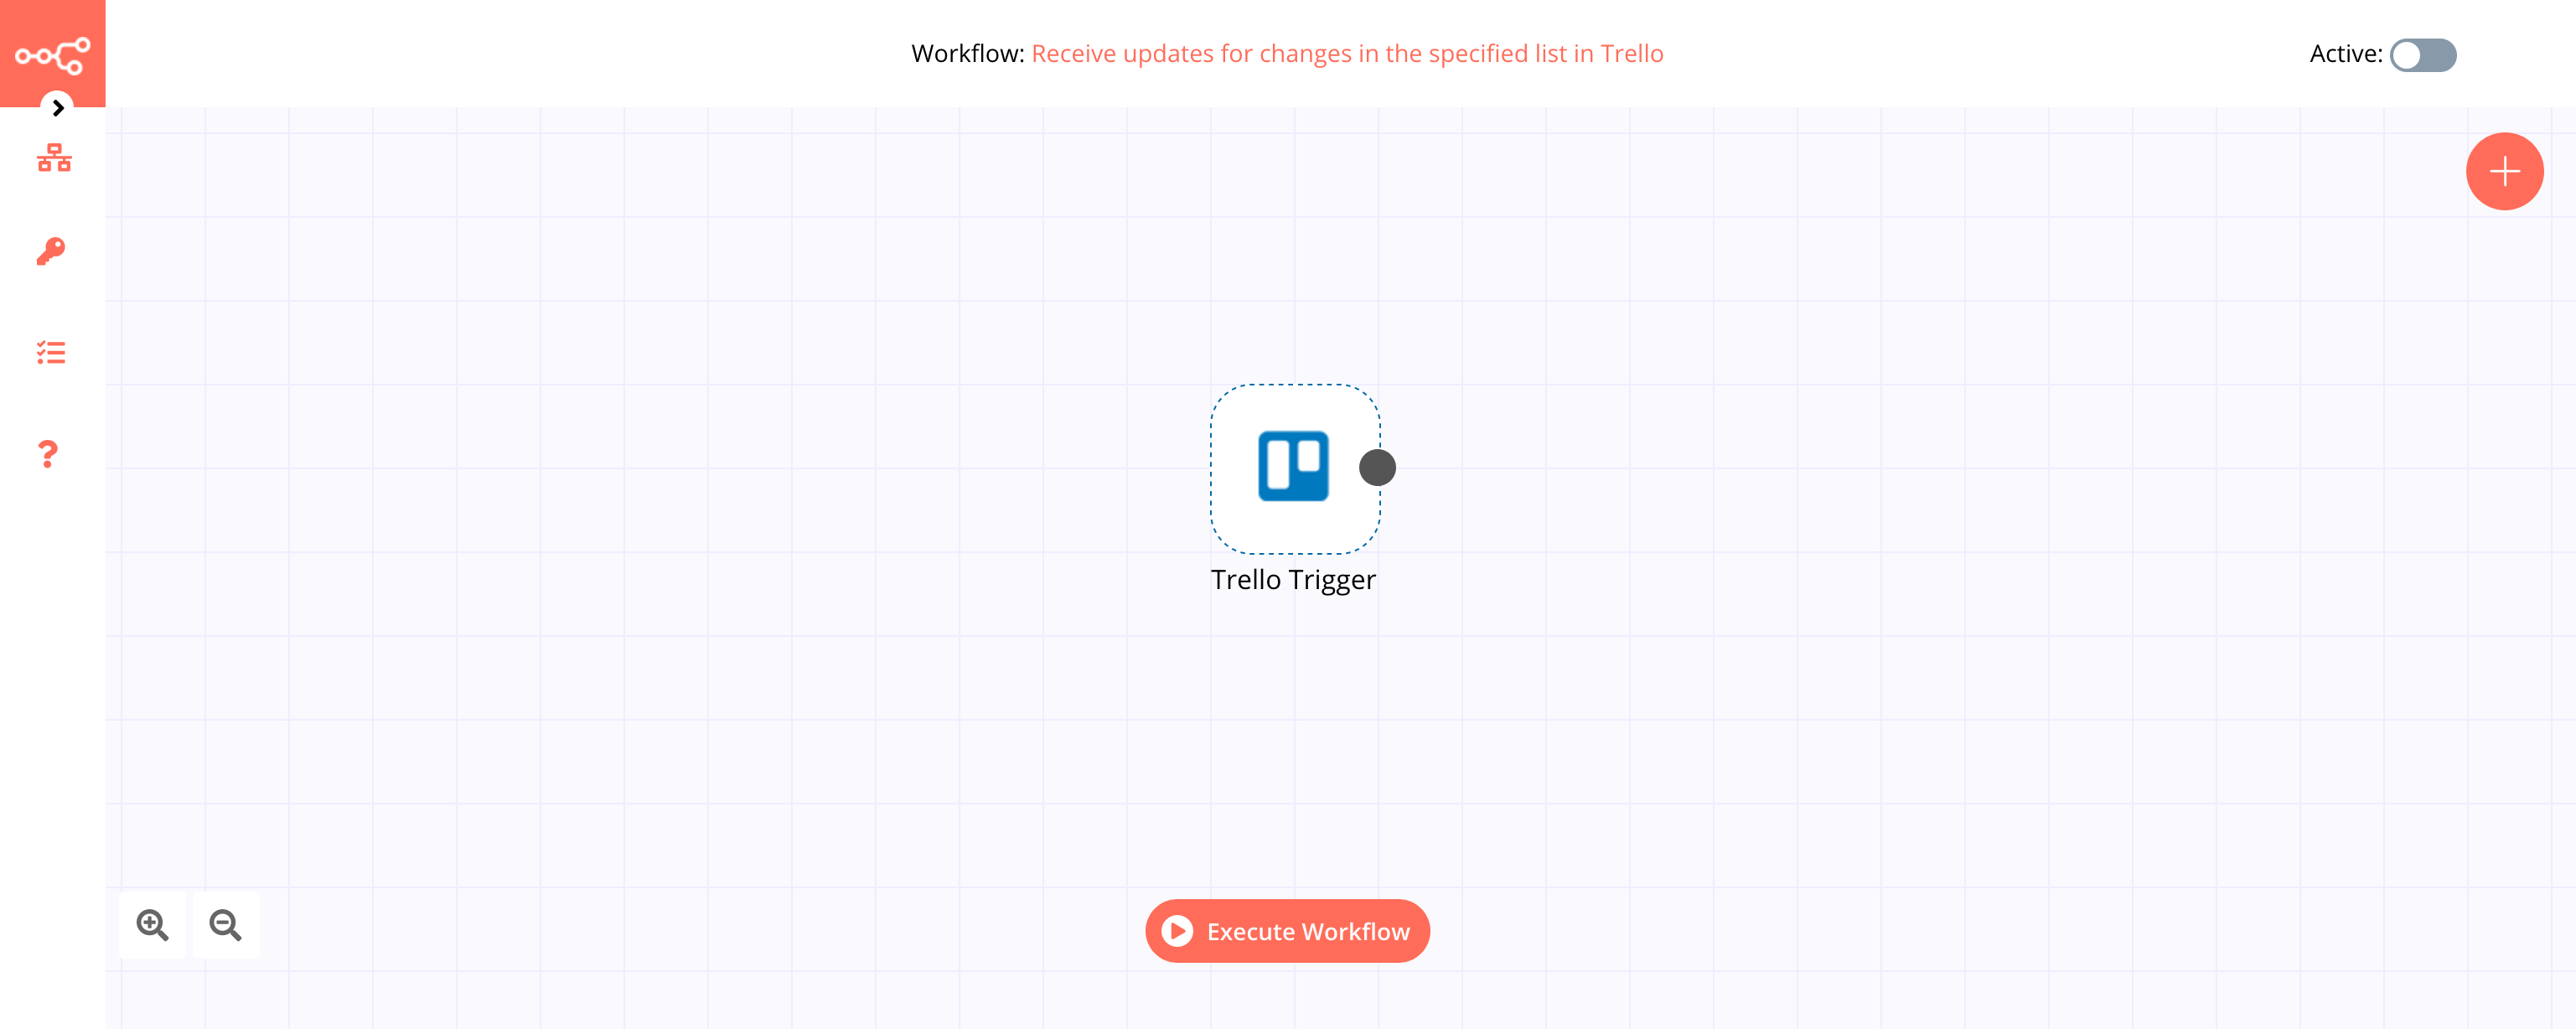 A workflow with the Trello Trigger node